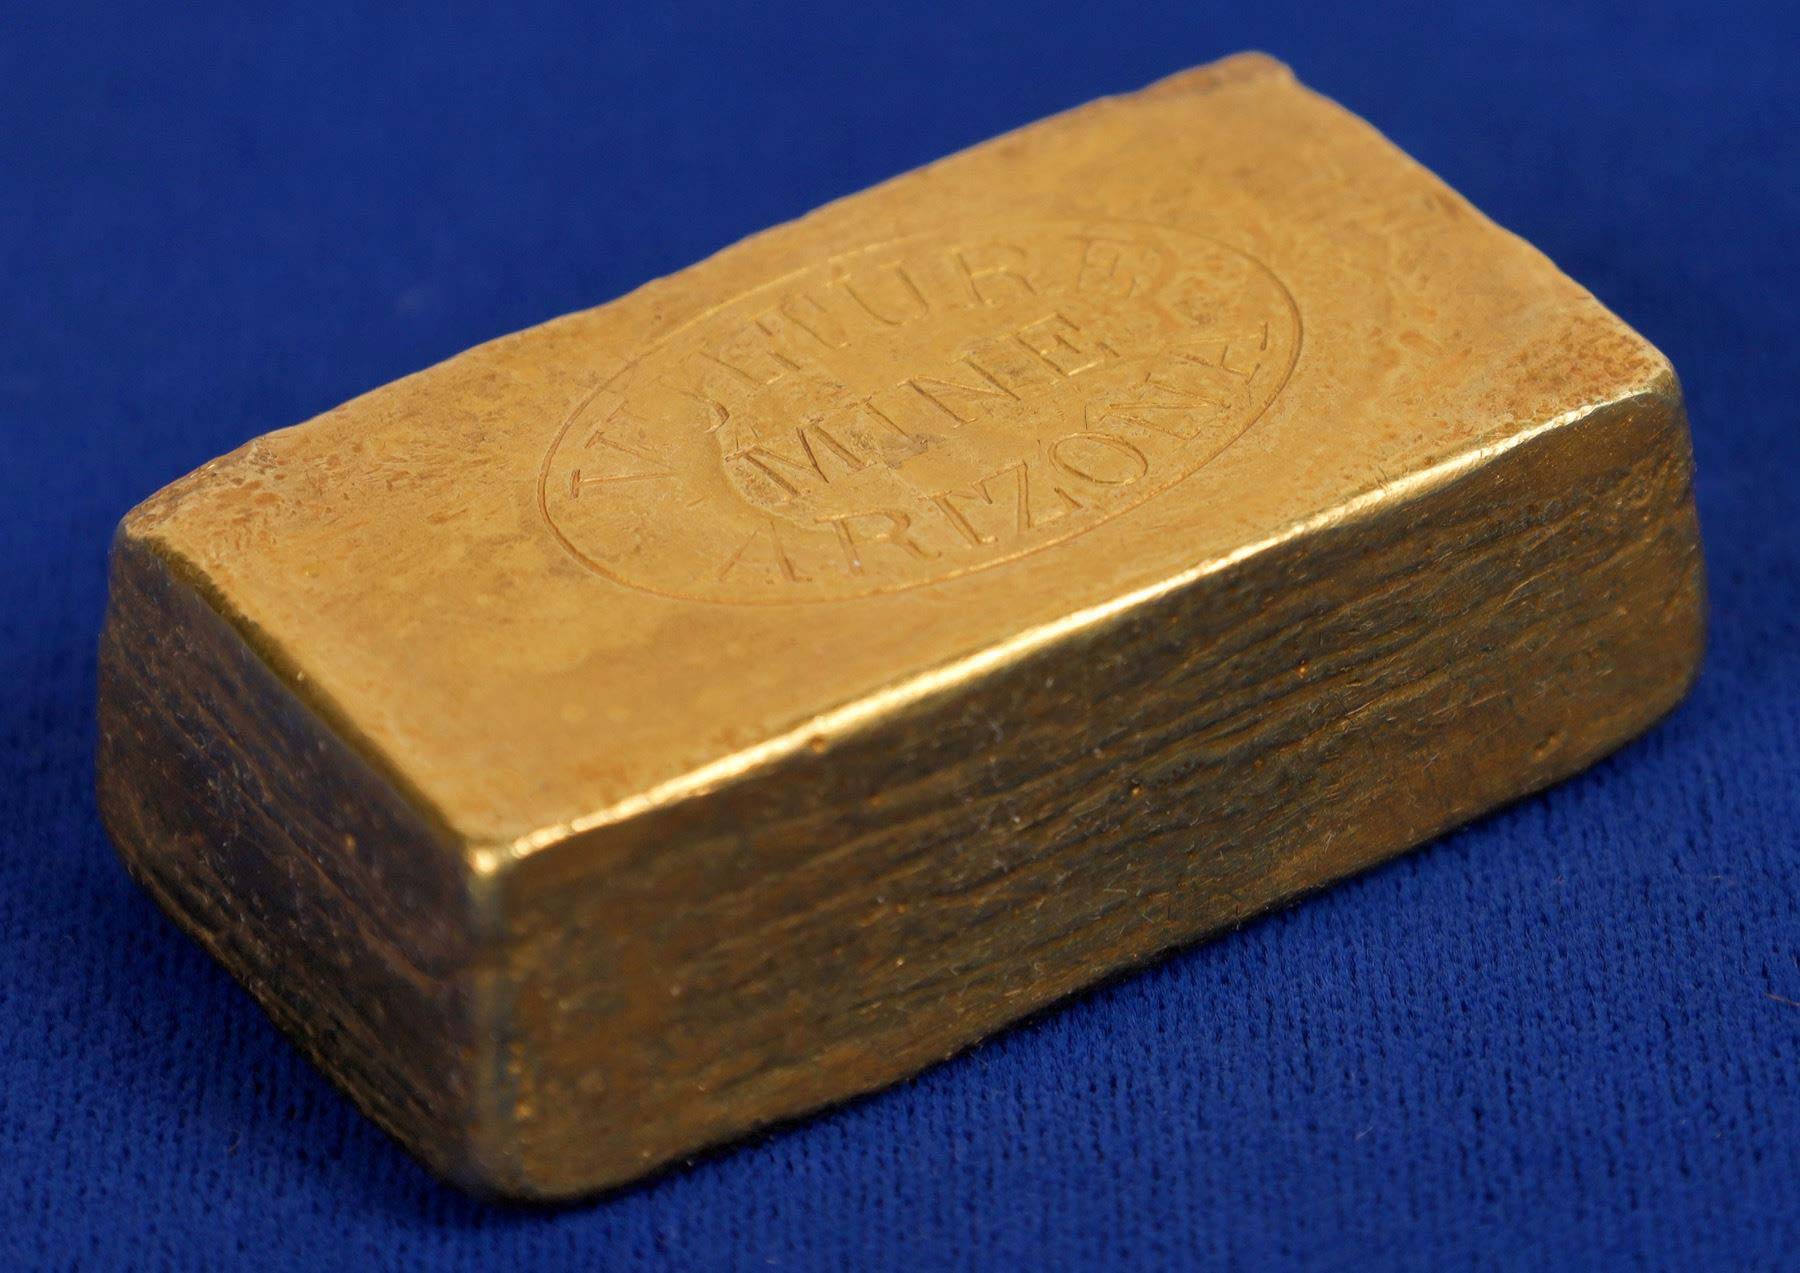 Important discovery gold ingot from the Vulture Gold Mine near Wickenburg, Arizona Territory, circa 1911-14, weighing 391.17 grams, 825 fine gold, with a report copy ($37,355). Image courtesy Holabird Western Americana Auctions and Live Auctioneers.